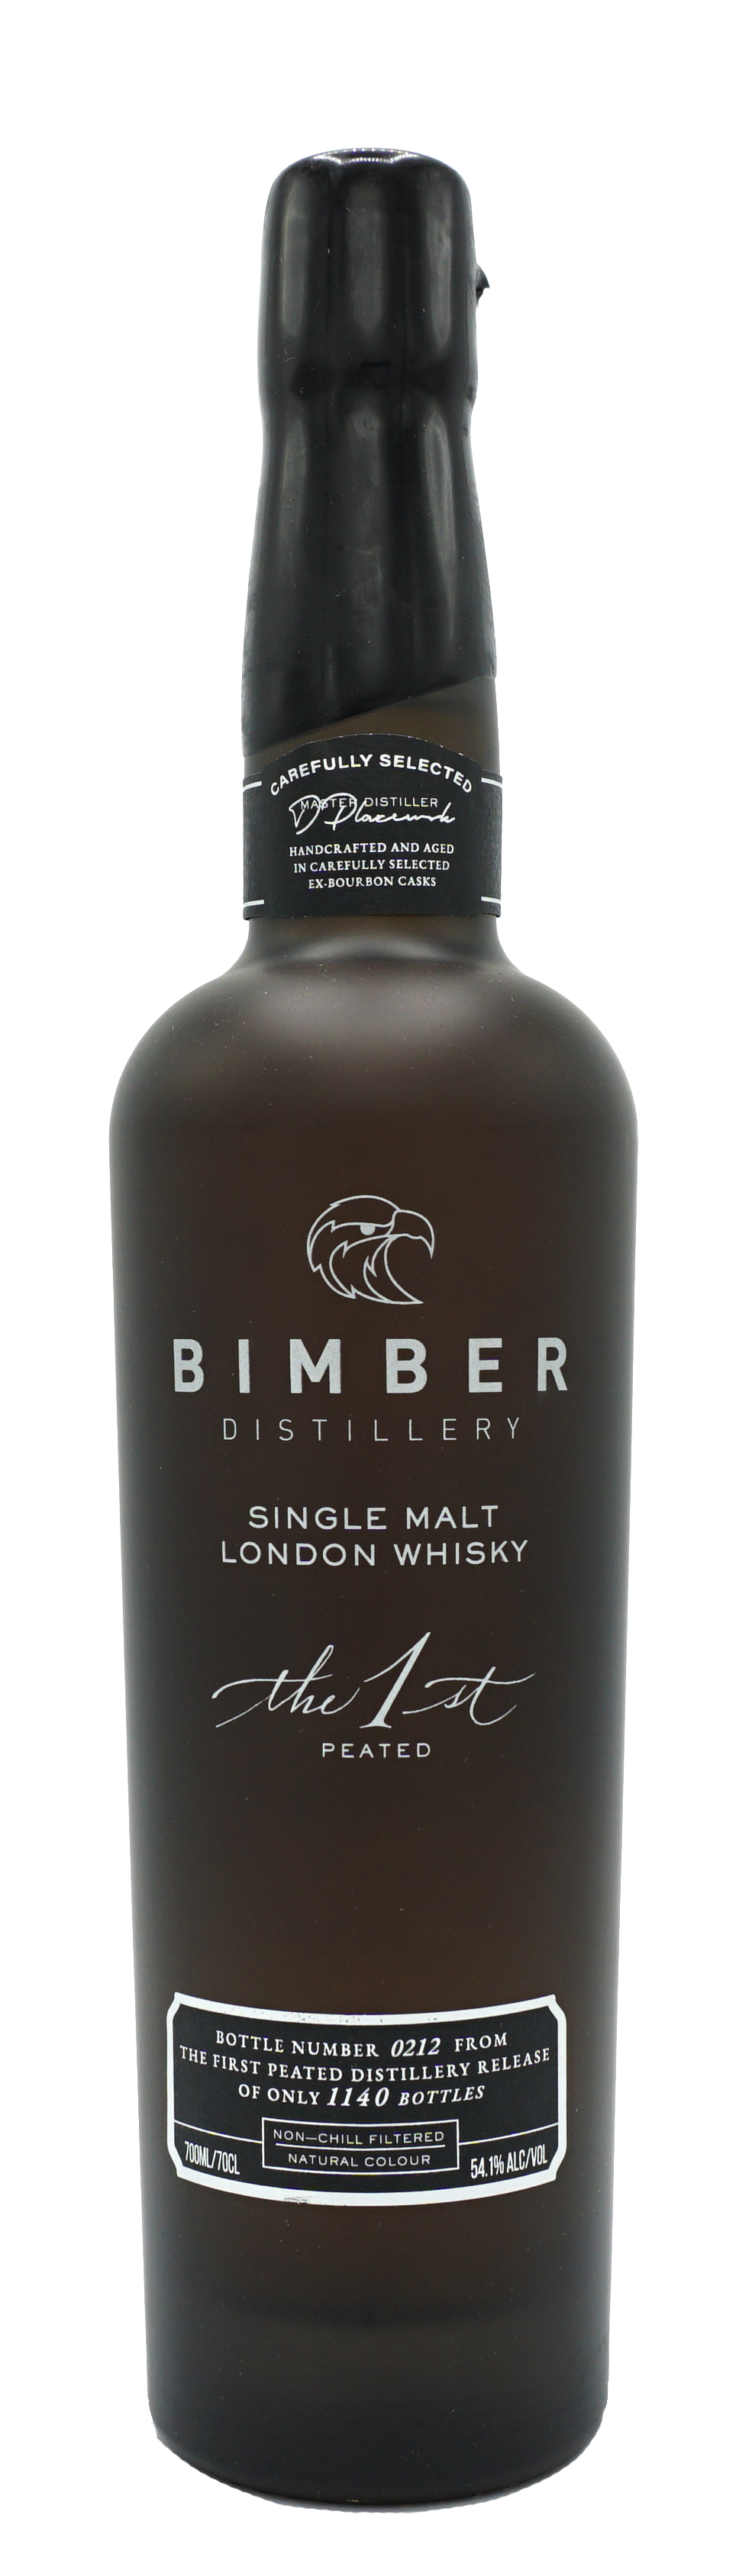 Bimber The First Peated Fles